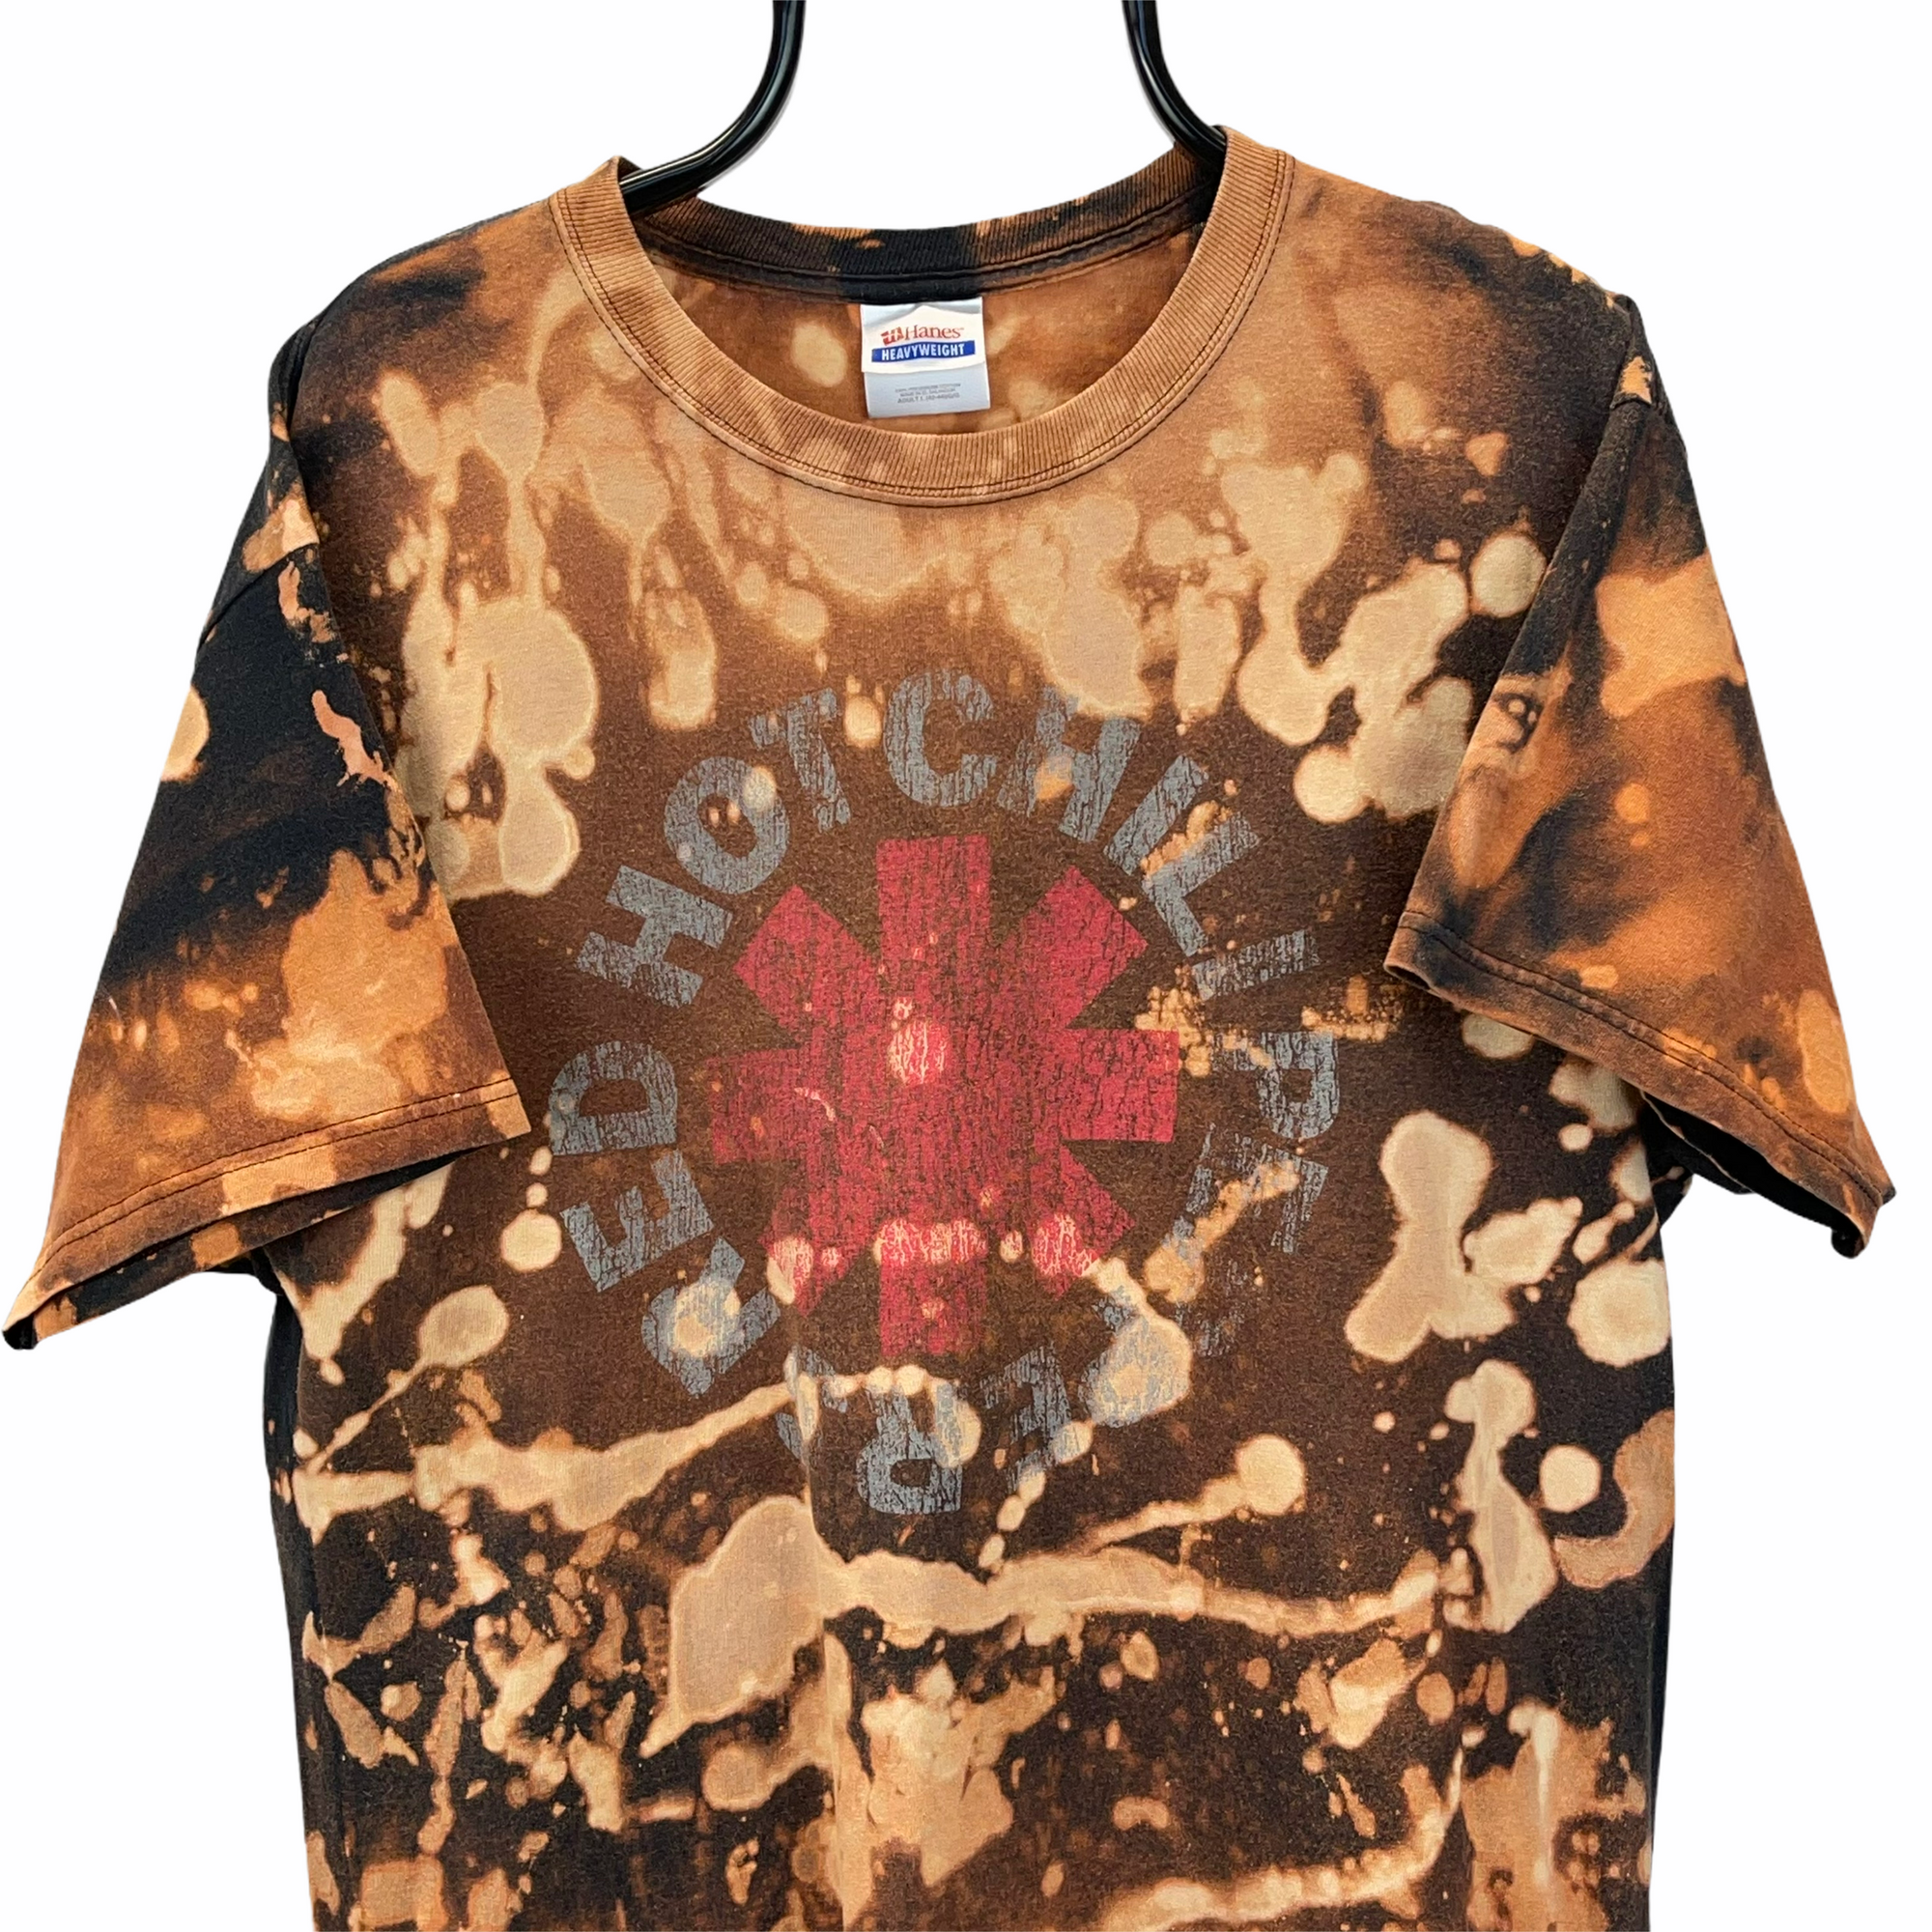 Red Hot Chili Peppers Acid Wash Tee - Men's Large/Women's XL